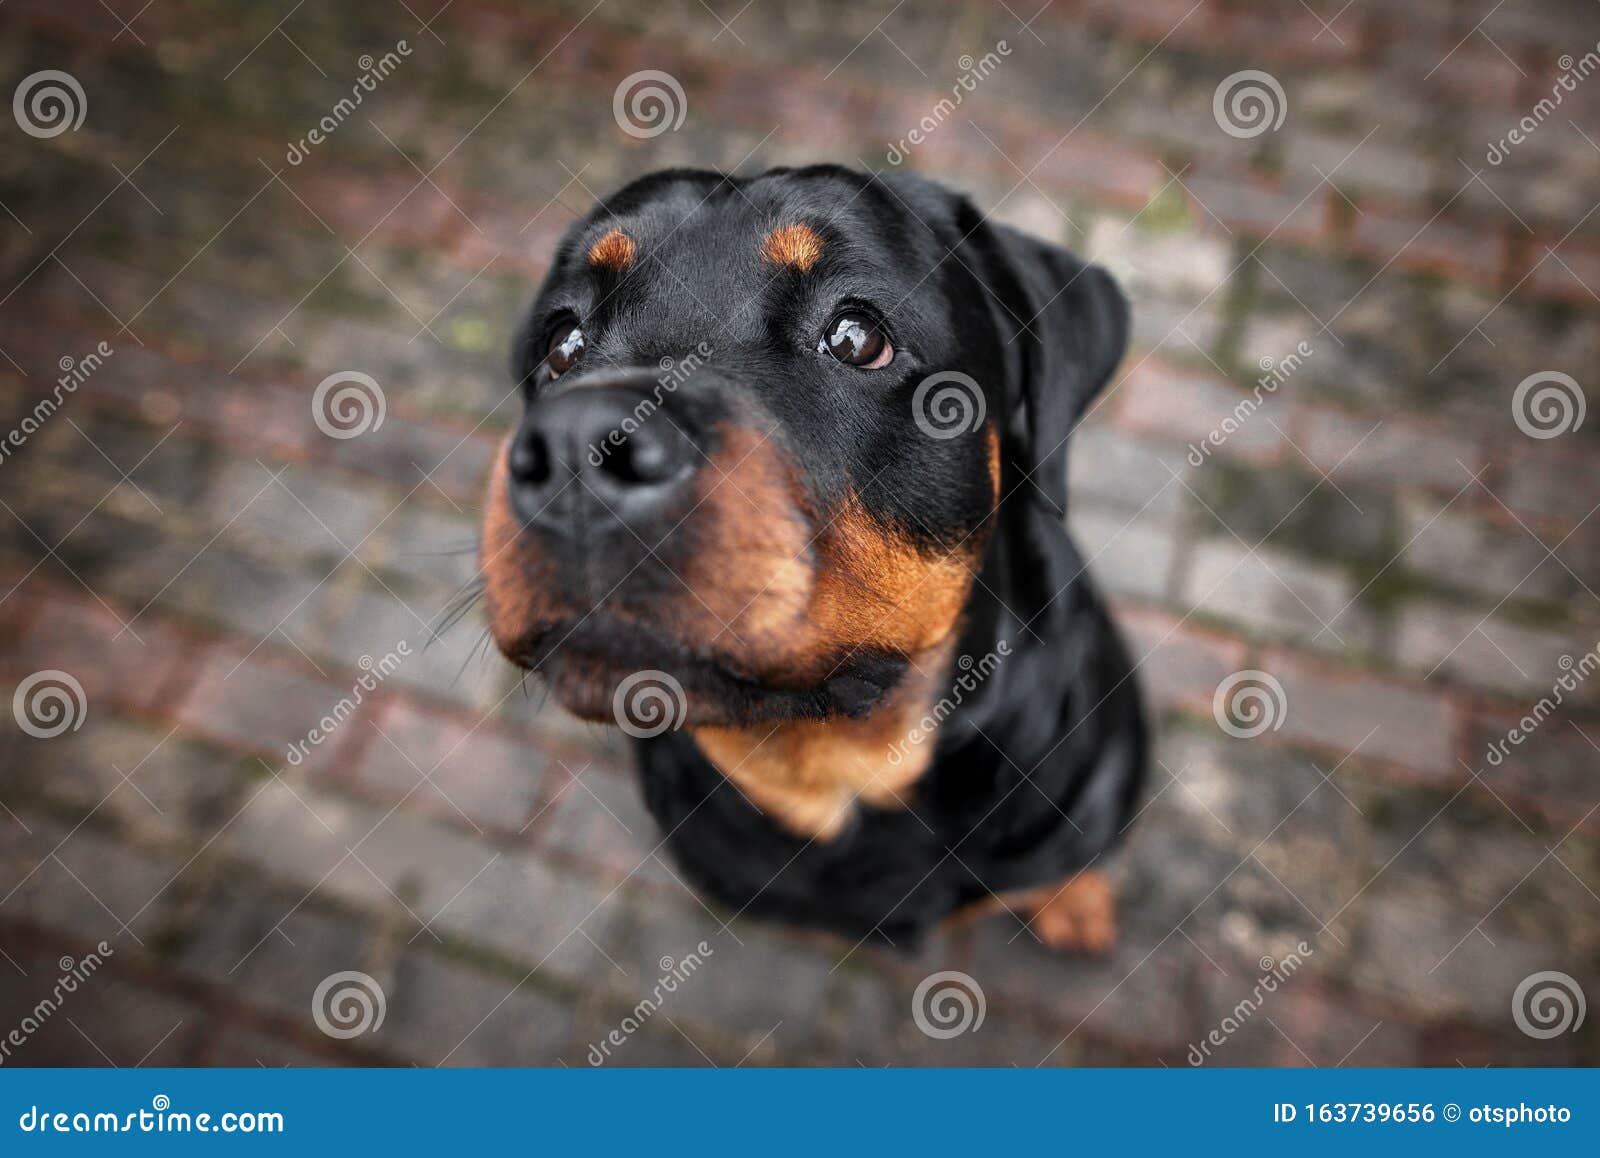 Rottweiler Dog Portrait Top View Stock Photo Image Of Rottweiler